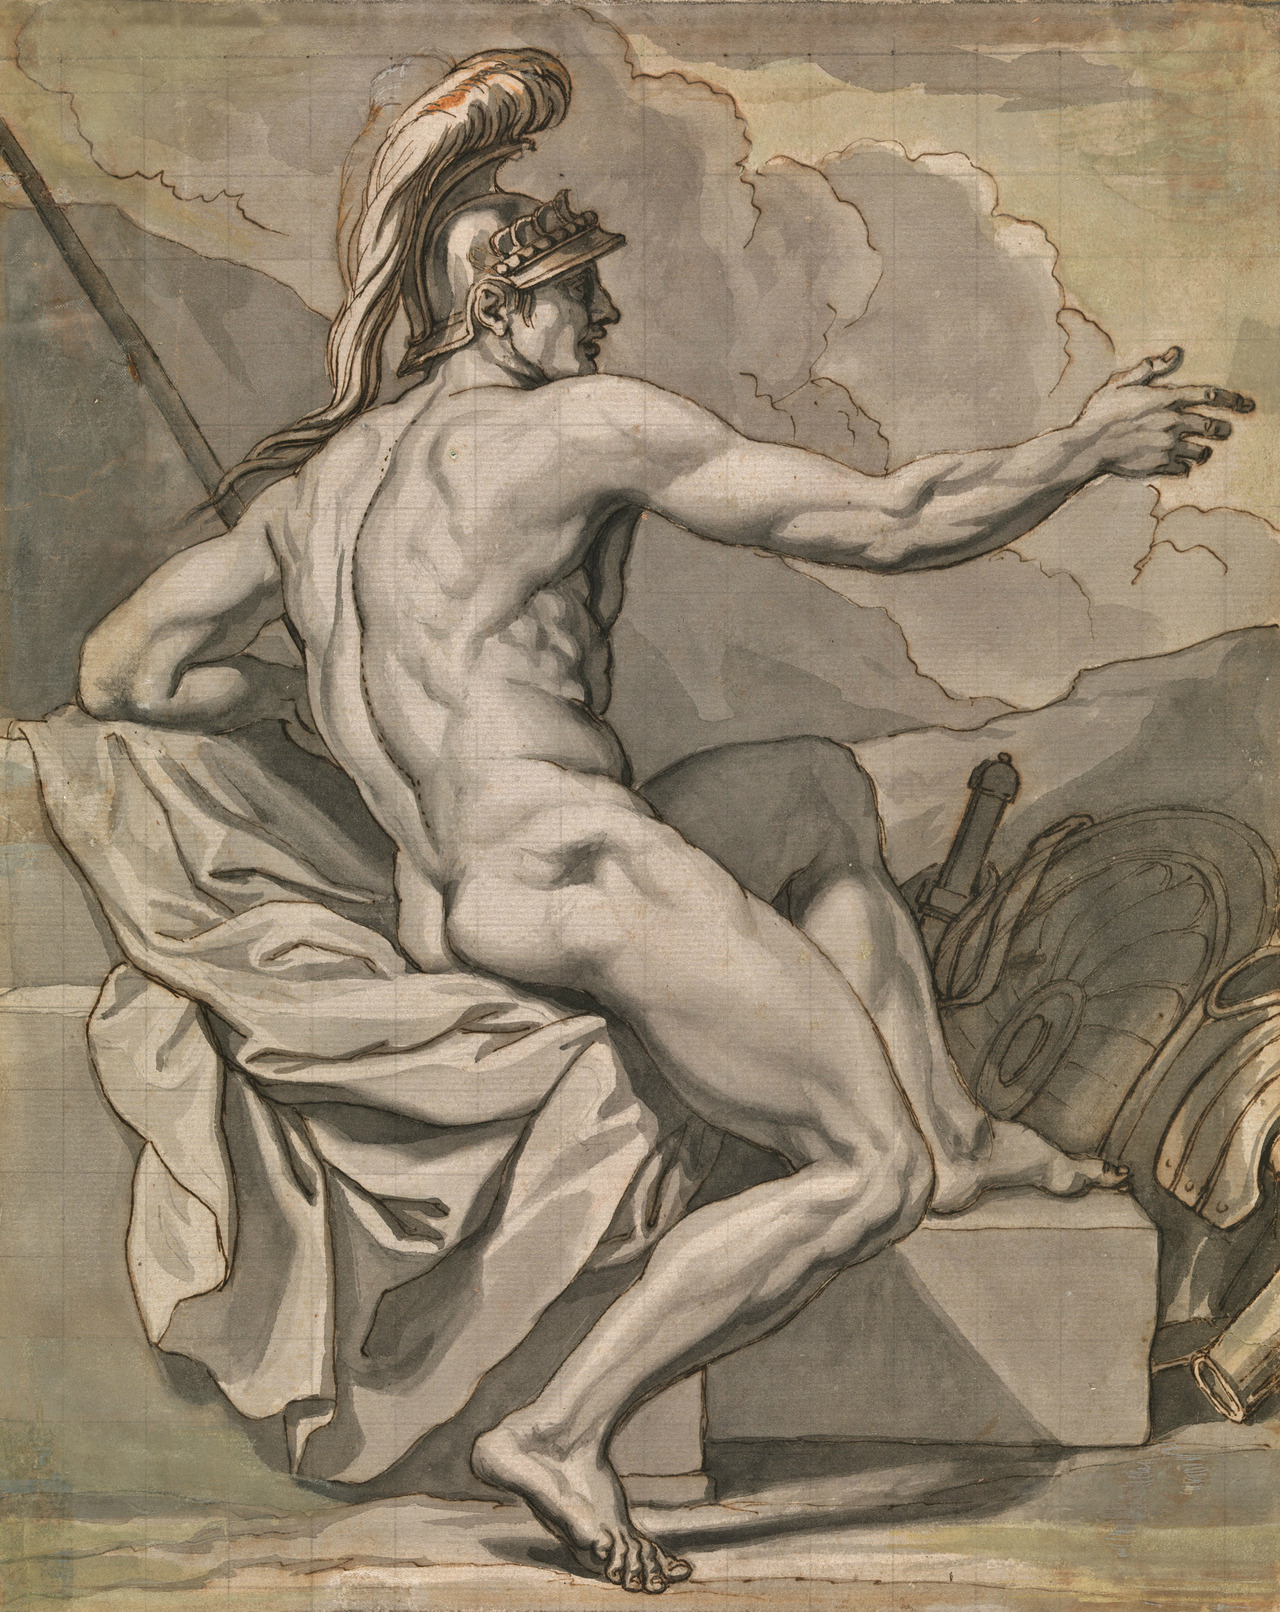 Mars. 1722. Louis Cheron. French 1660-1725. pen and ink and wash over black chalk. http://hadrian6.tumblr.com